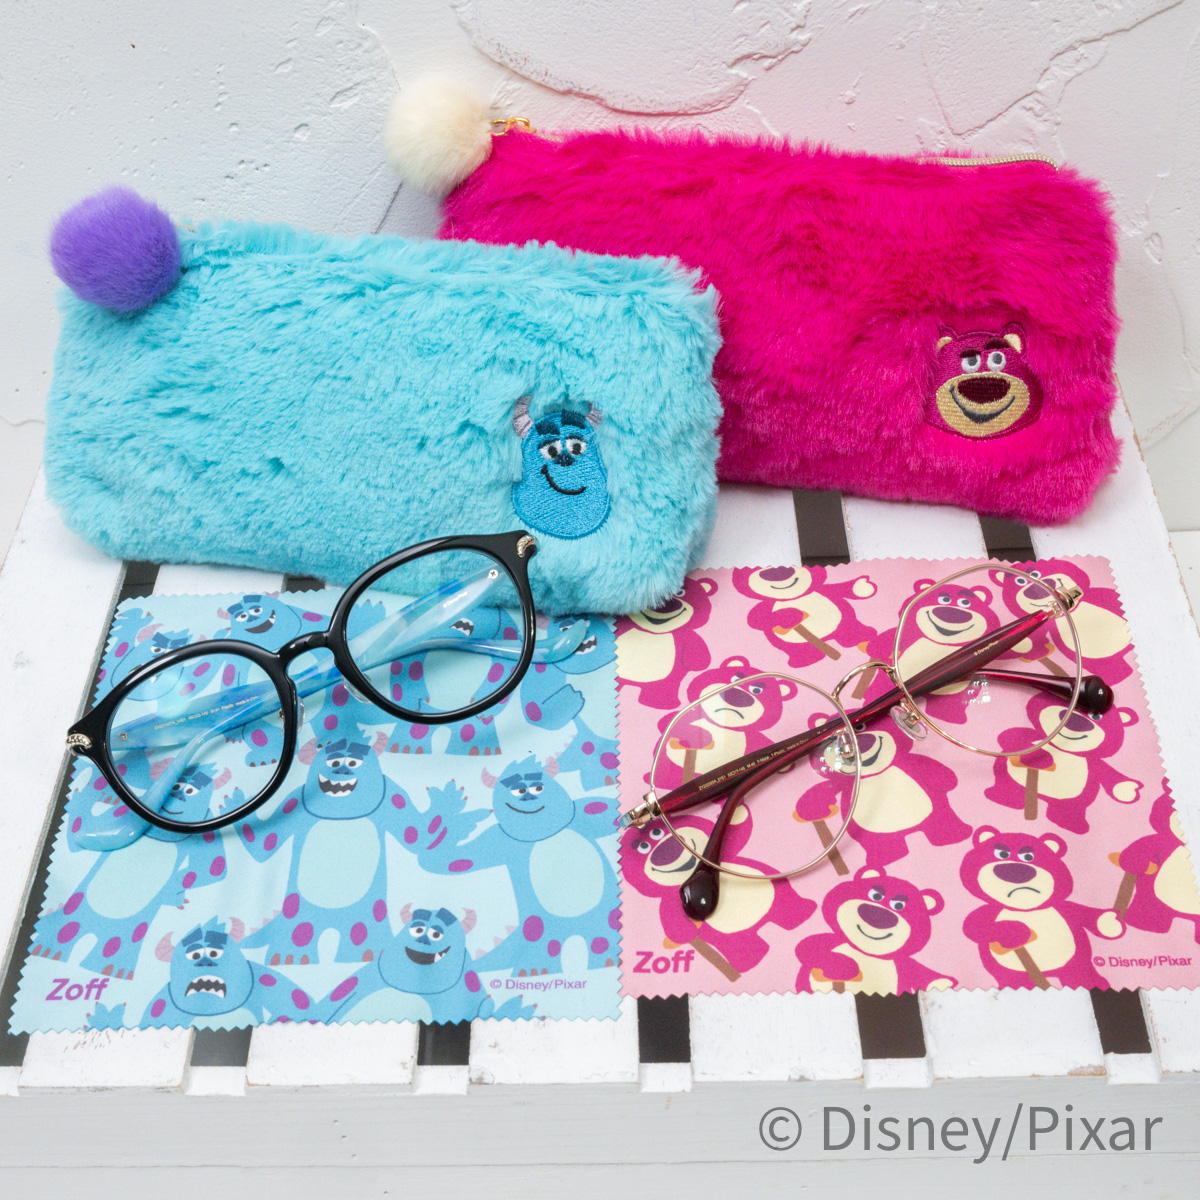 Disney Collection created by Zoff “FURRY series”ディズニー&ピクサー